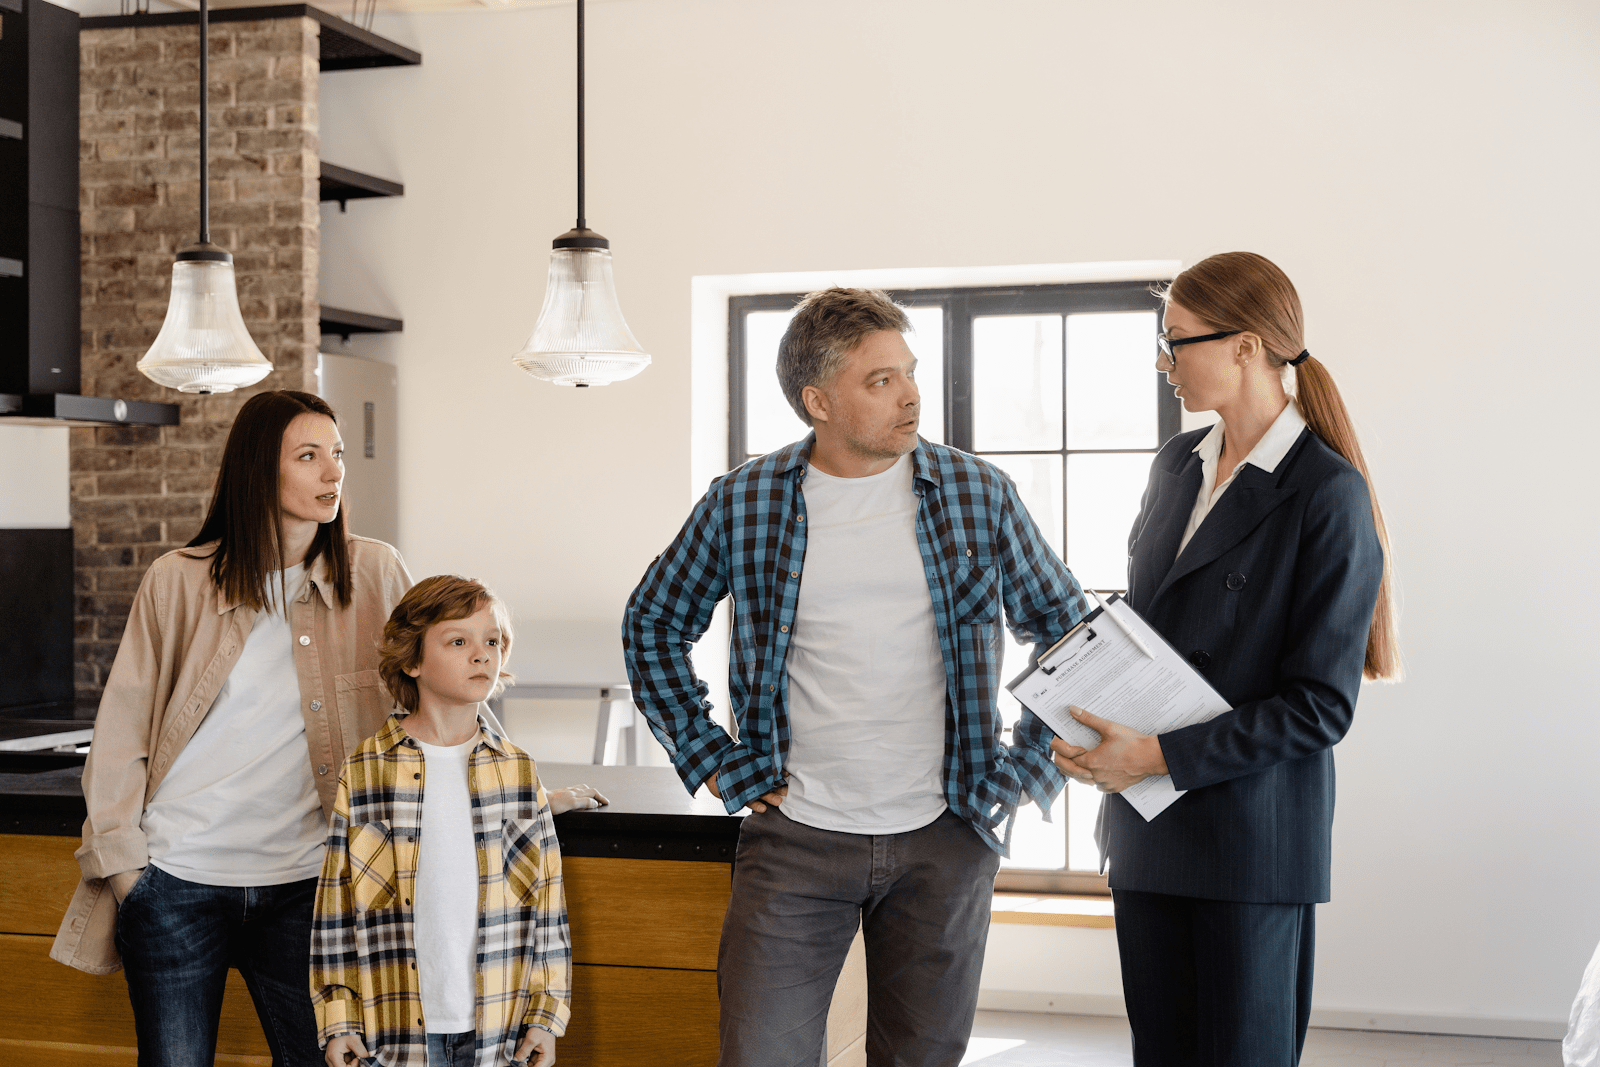 the real estate agent asks family opinion about viewed house